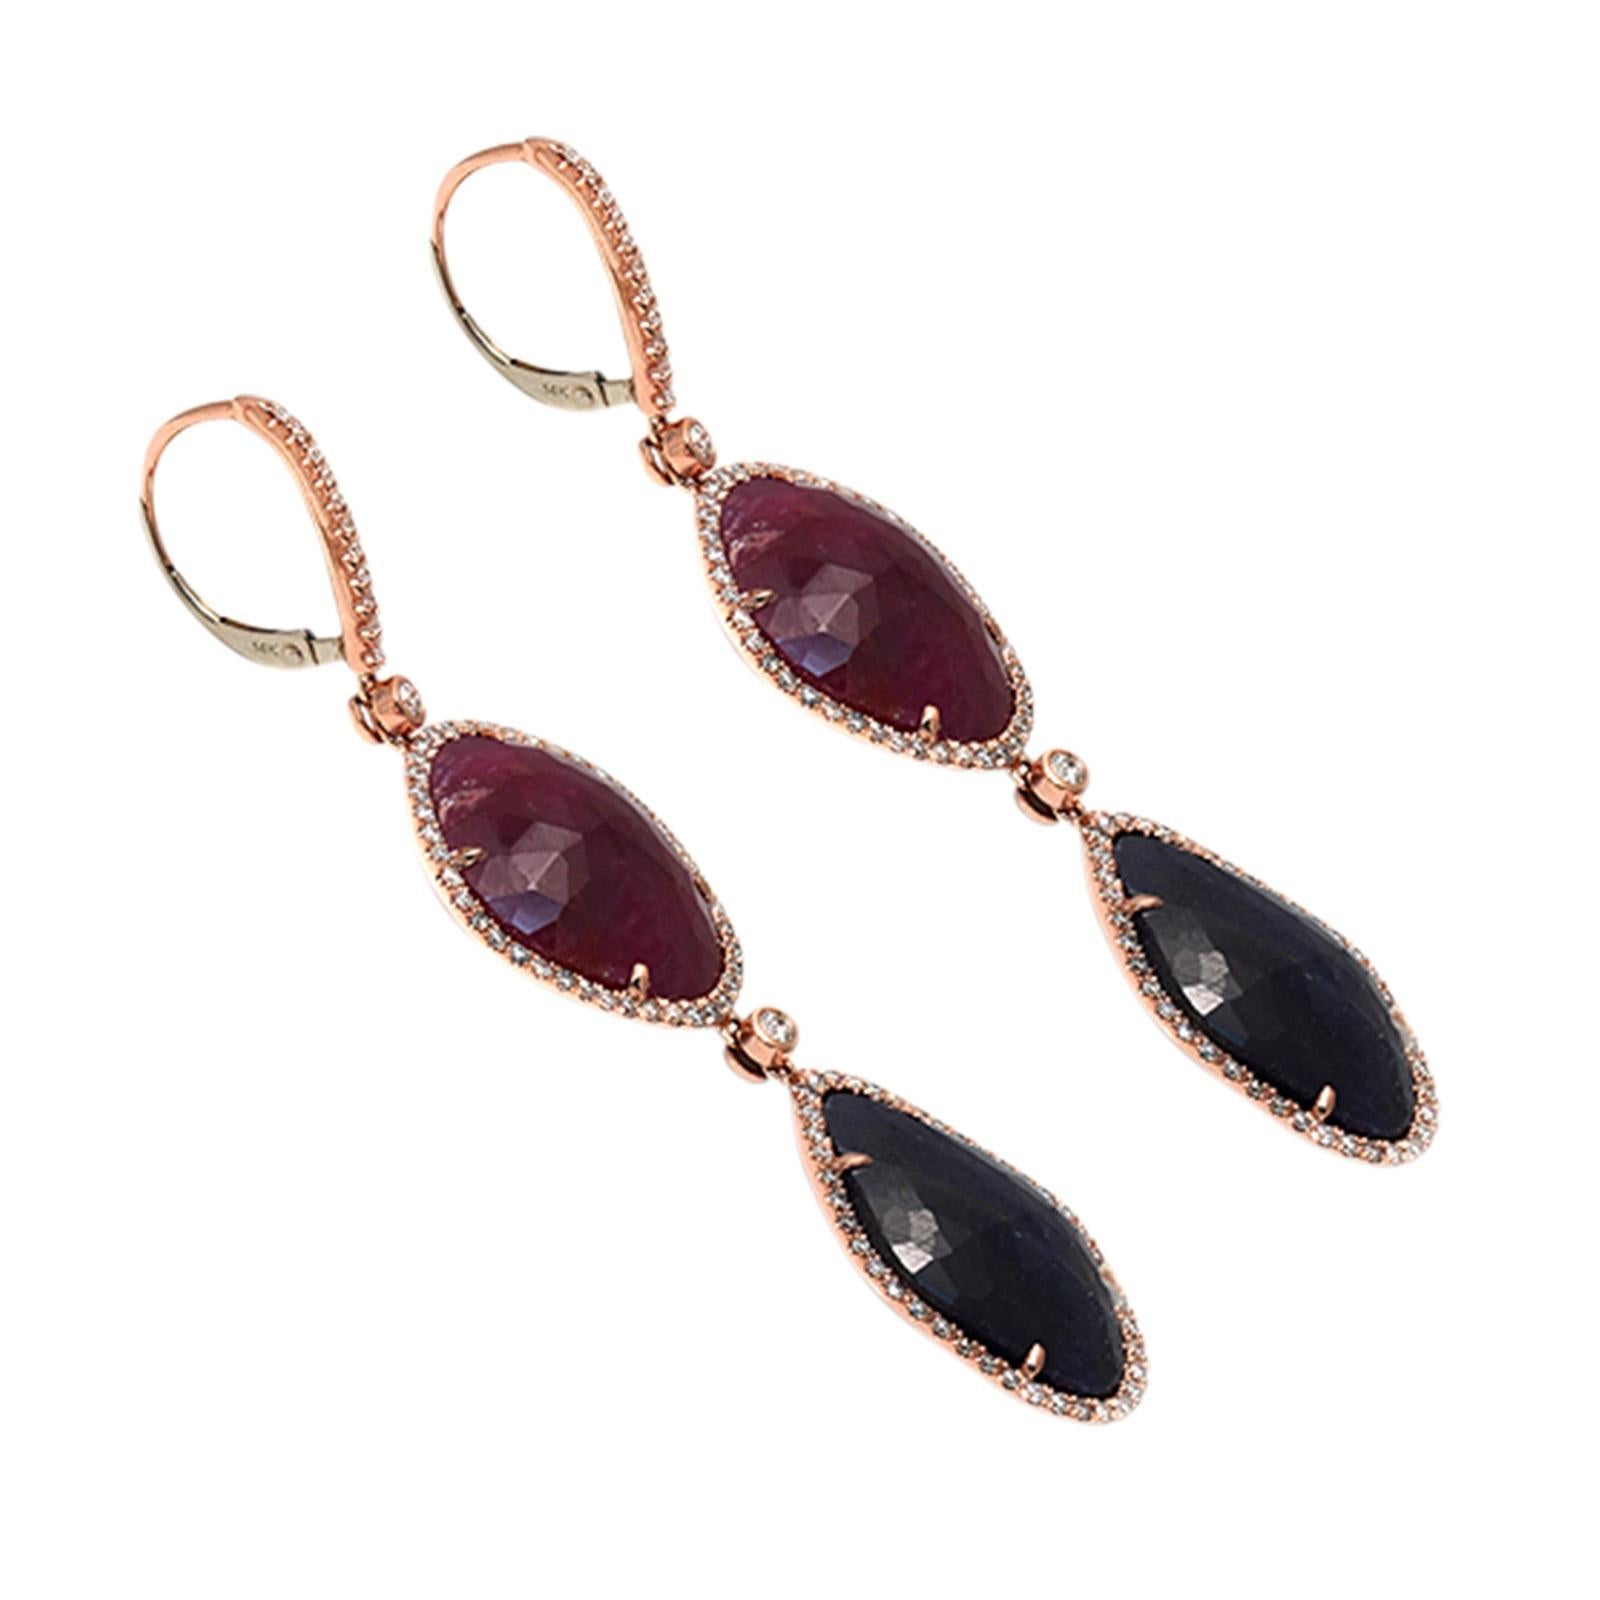 Type: Earrings
Height: 68 mm
Width: 17.5 mm
Metal: Rose Gold
Metal Purity: 14K
Hallmarks: 14K
Total Weight:14.7 Grams
Stone Type: 39 CT Natural Sapphire and Ruby, 1.24 CT G SI1 Diamonds
Condition: New
Stock Number: NP19